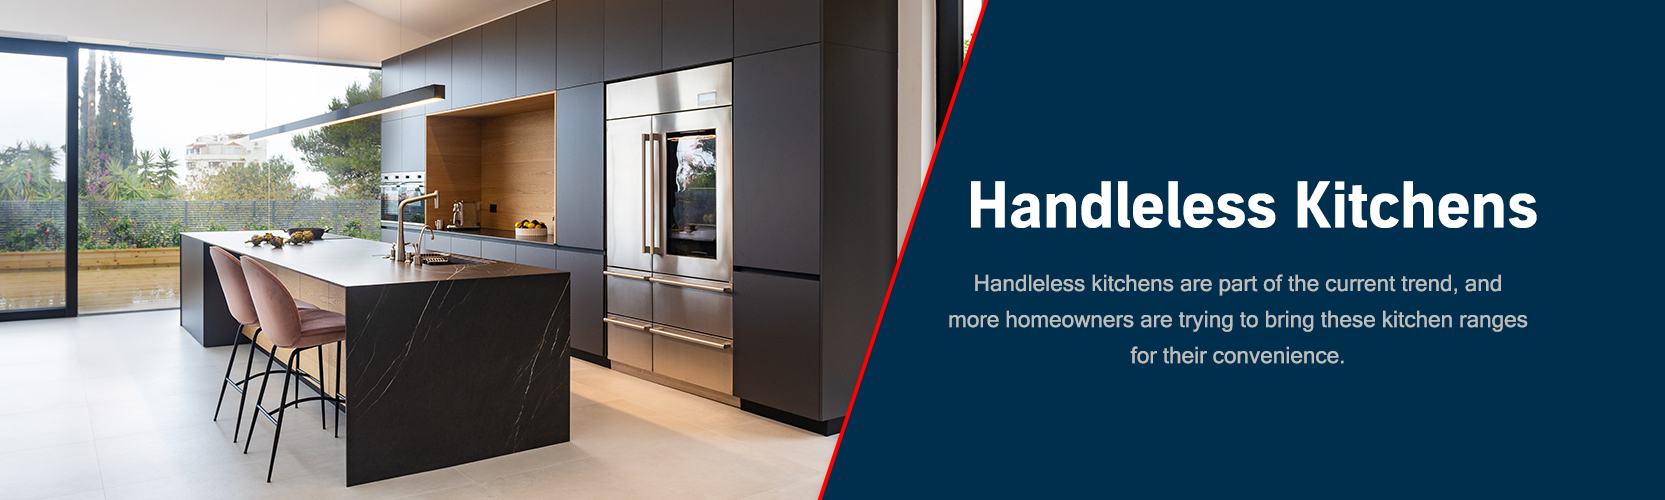 Discover Stunning Handleless Kitchens - Order Today! Highdecora